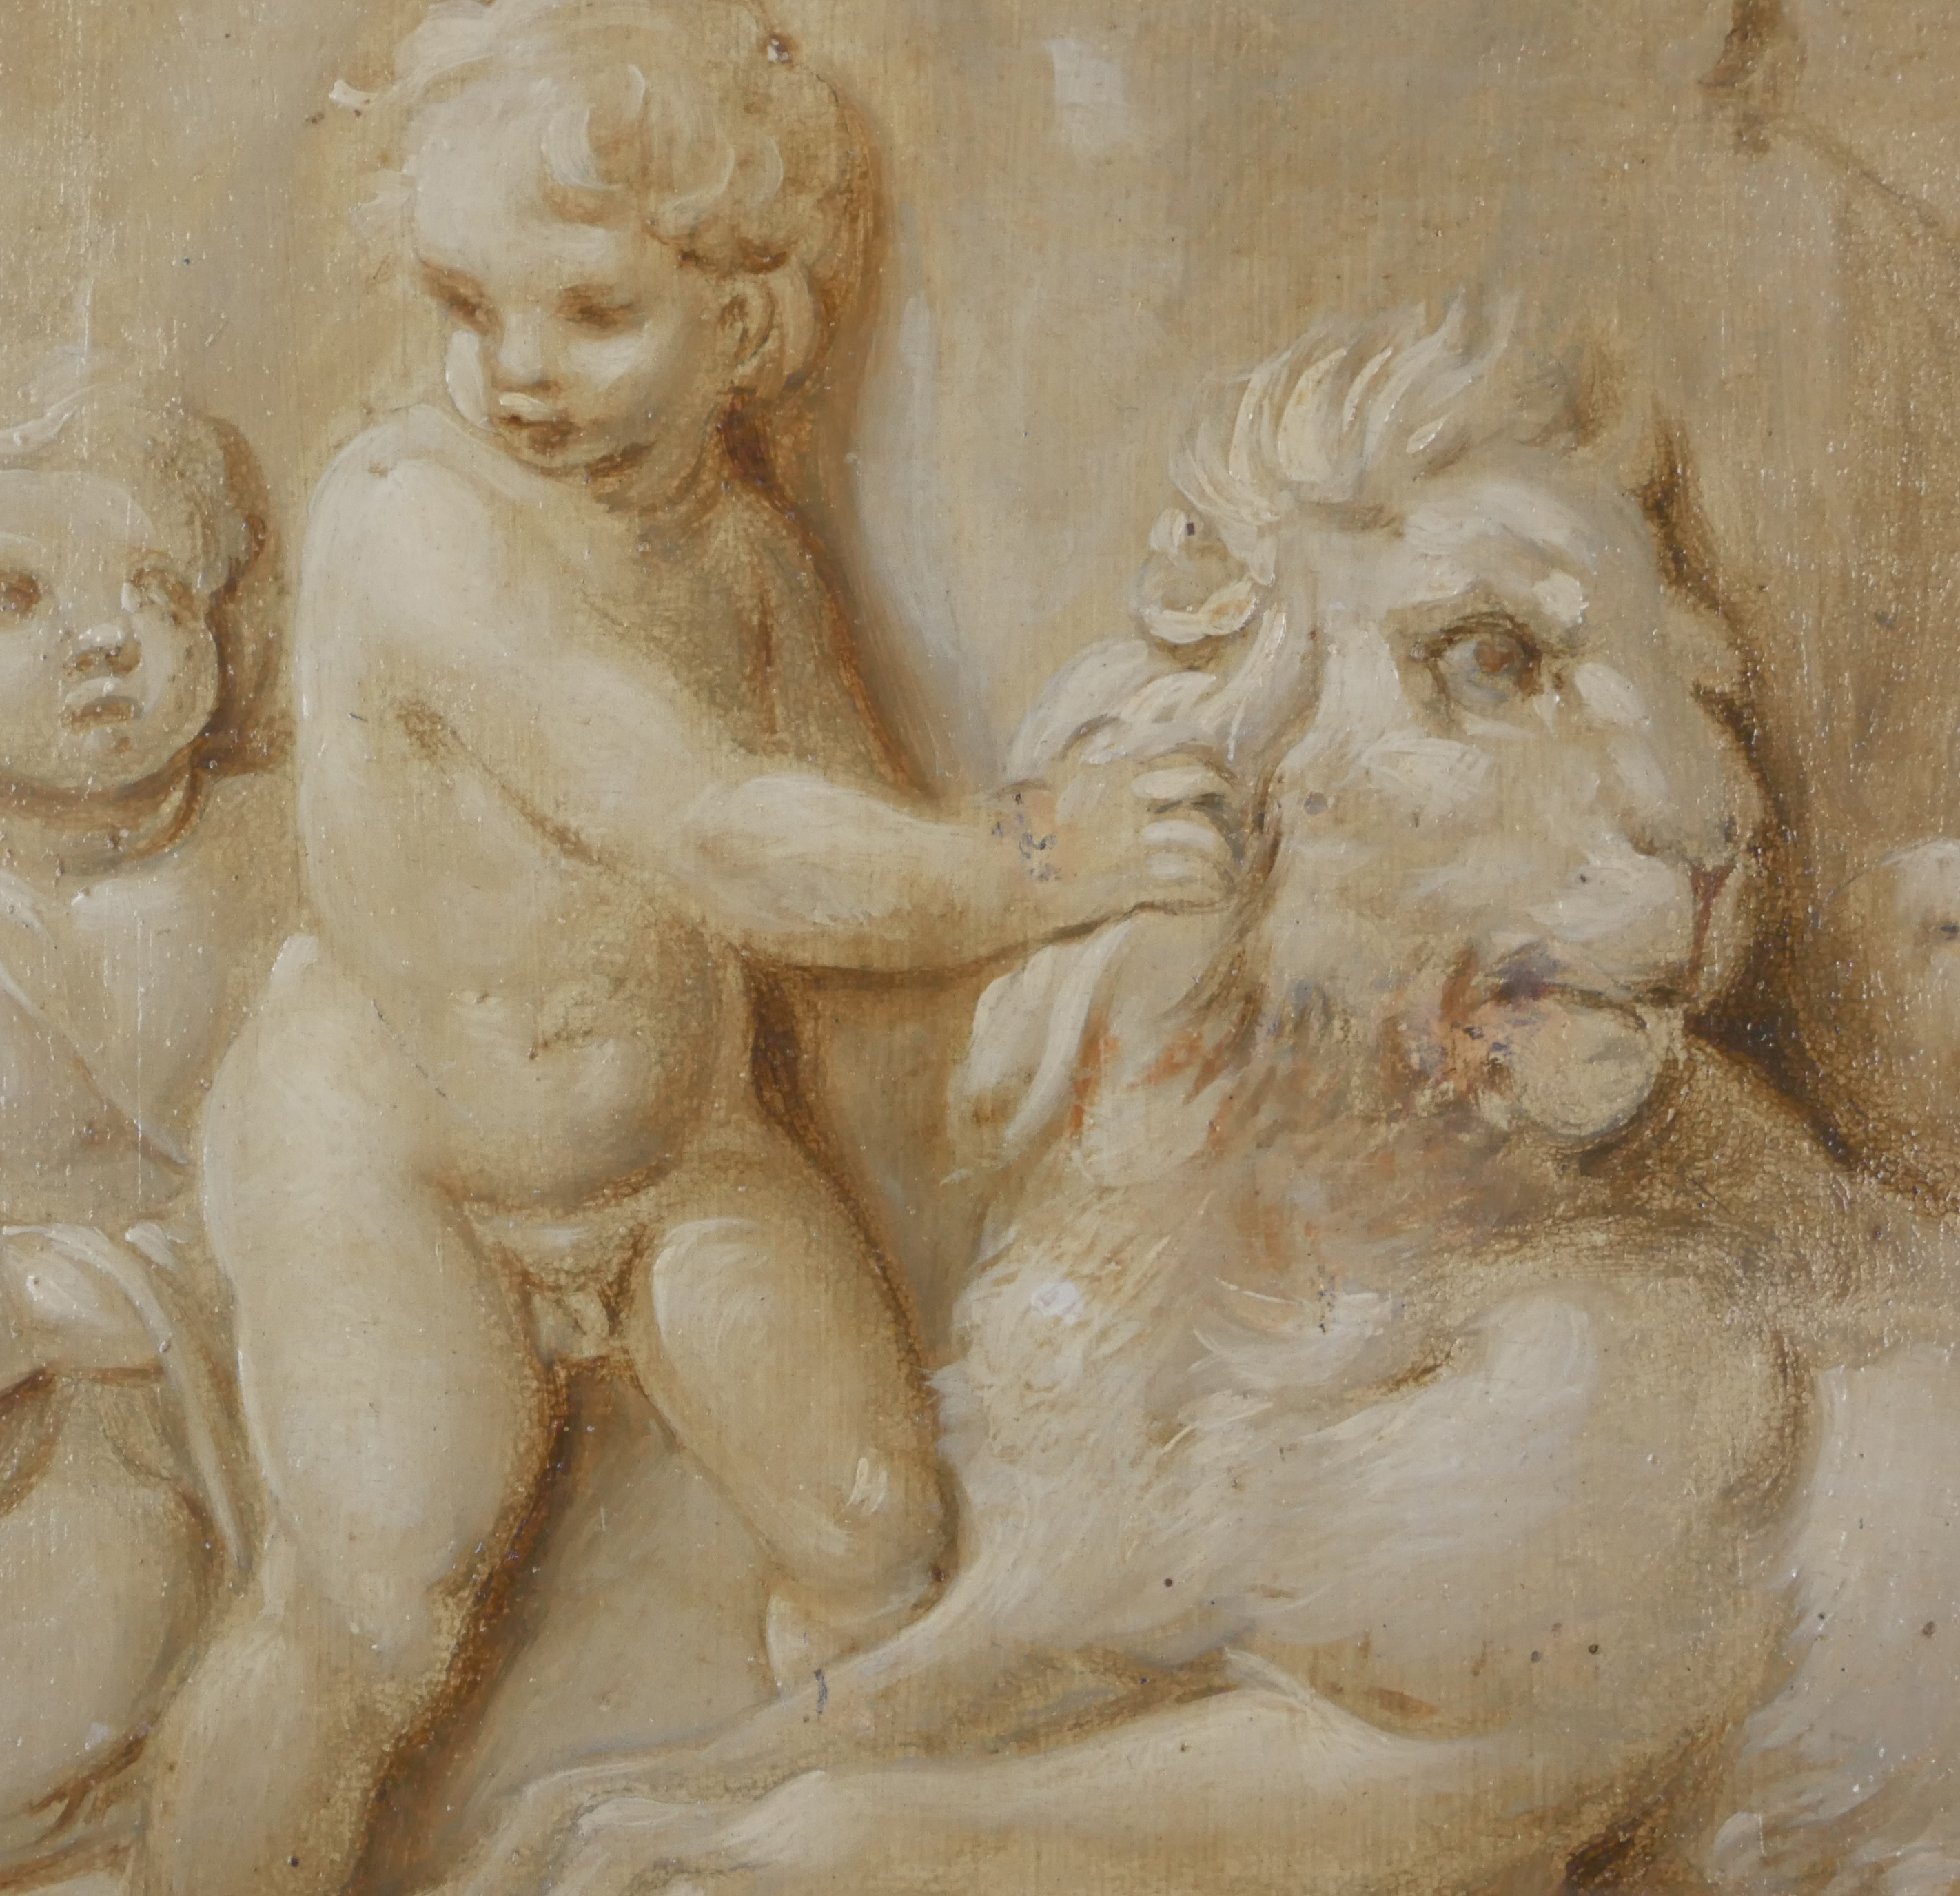 ATTRIBUTED TO JACOB DE WIT, AMSTERDAM, 1695 - 1754, A PAIR OF 18TH CENTURY OILS ON PANEL Putti - Image 5 of 8